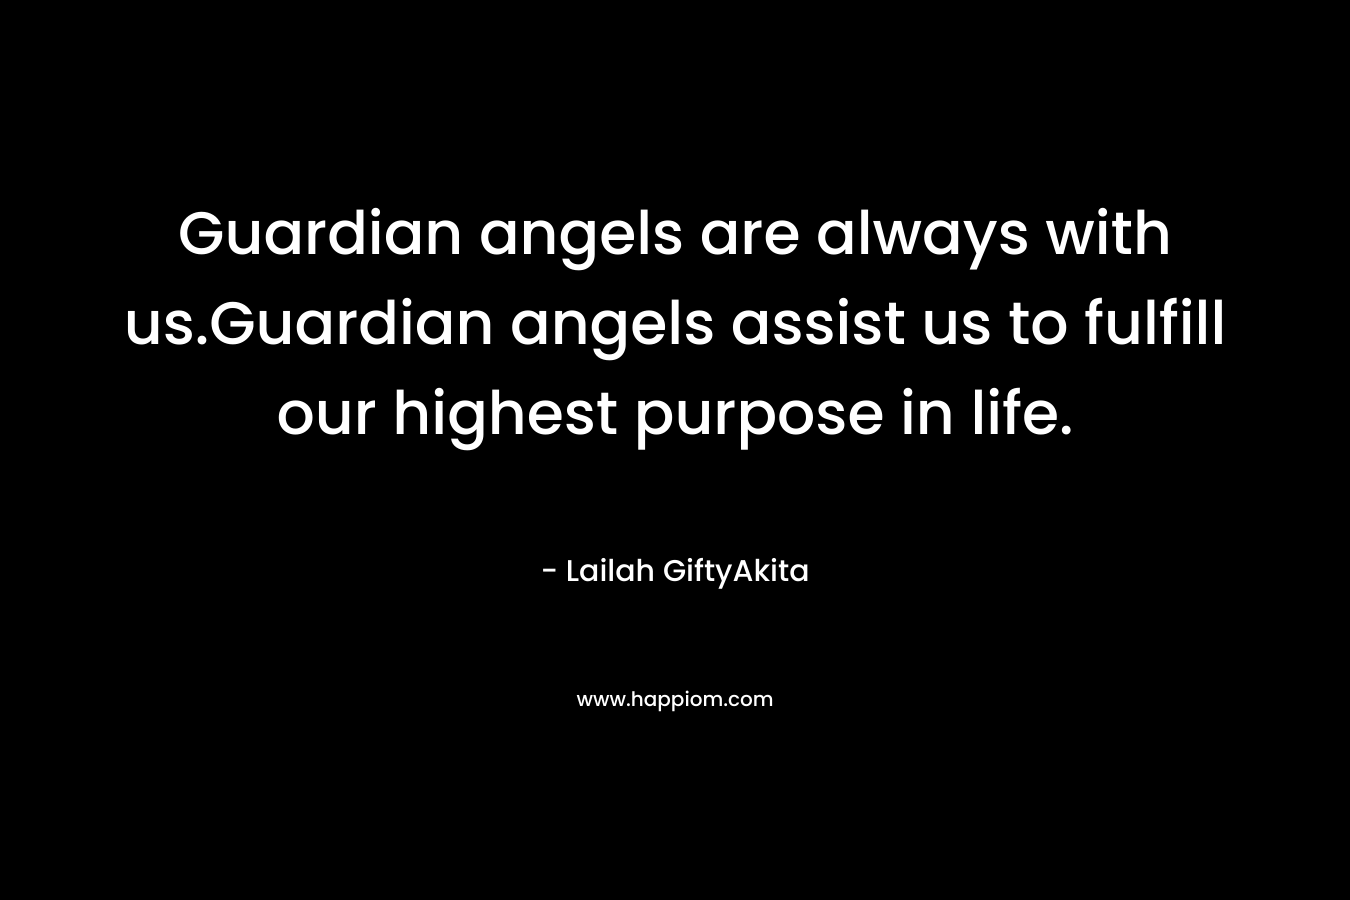 Guardian angels are always with us.Guardian angels assist us to fulfill our highest purpose in life.